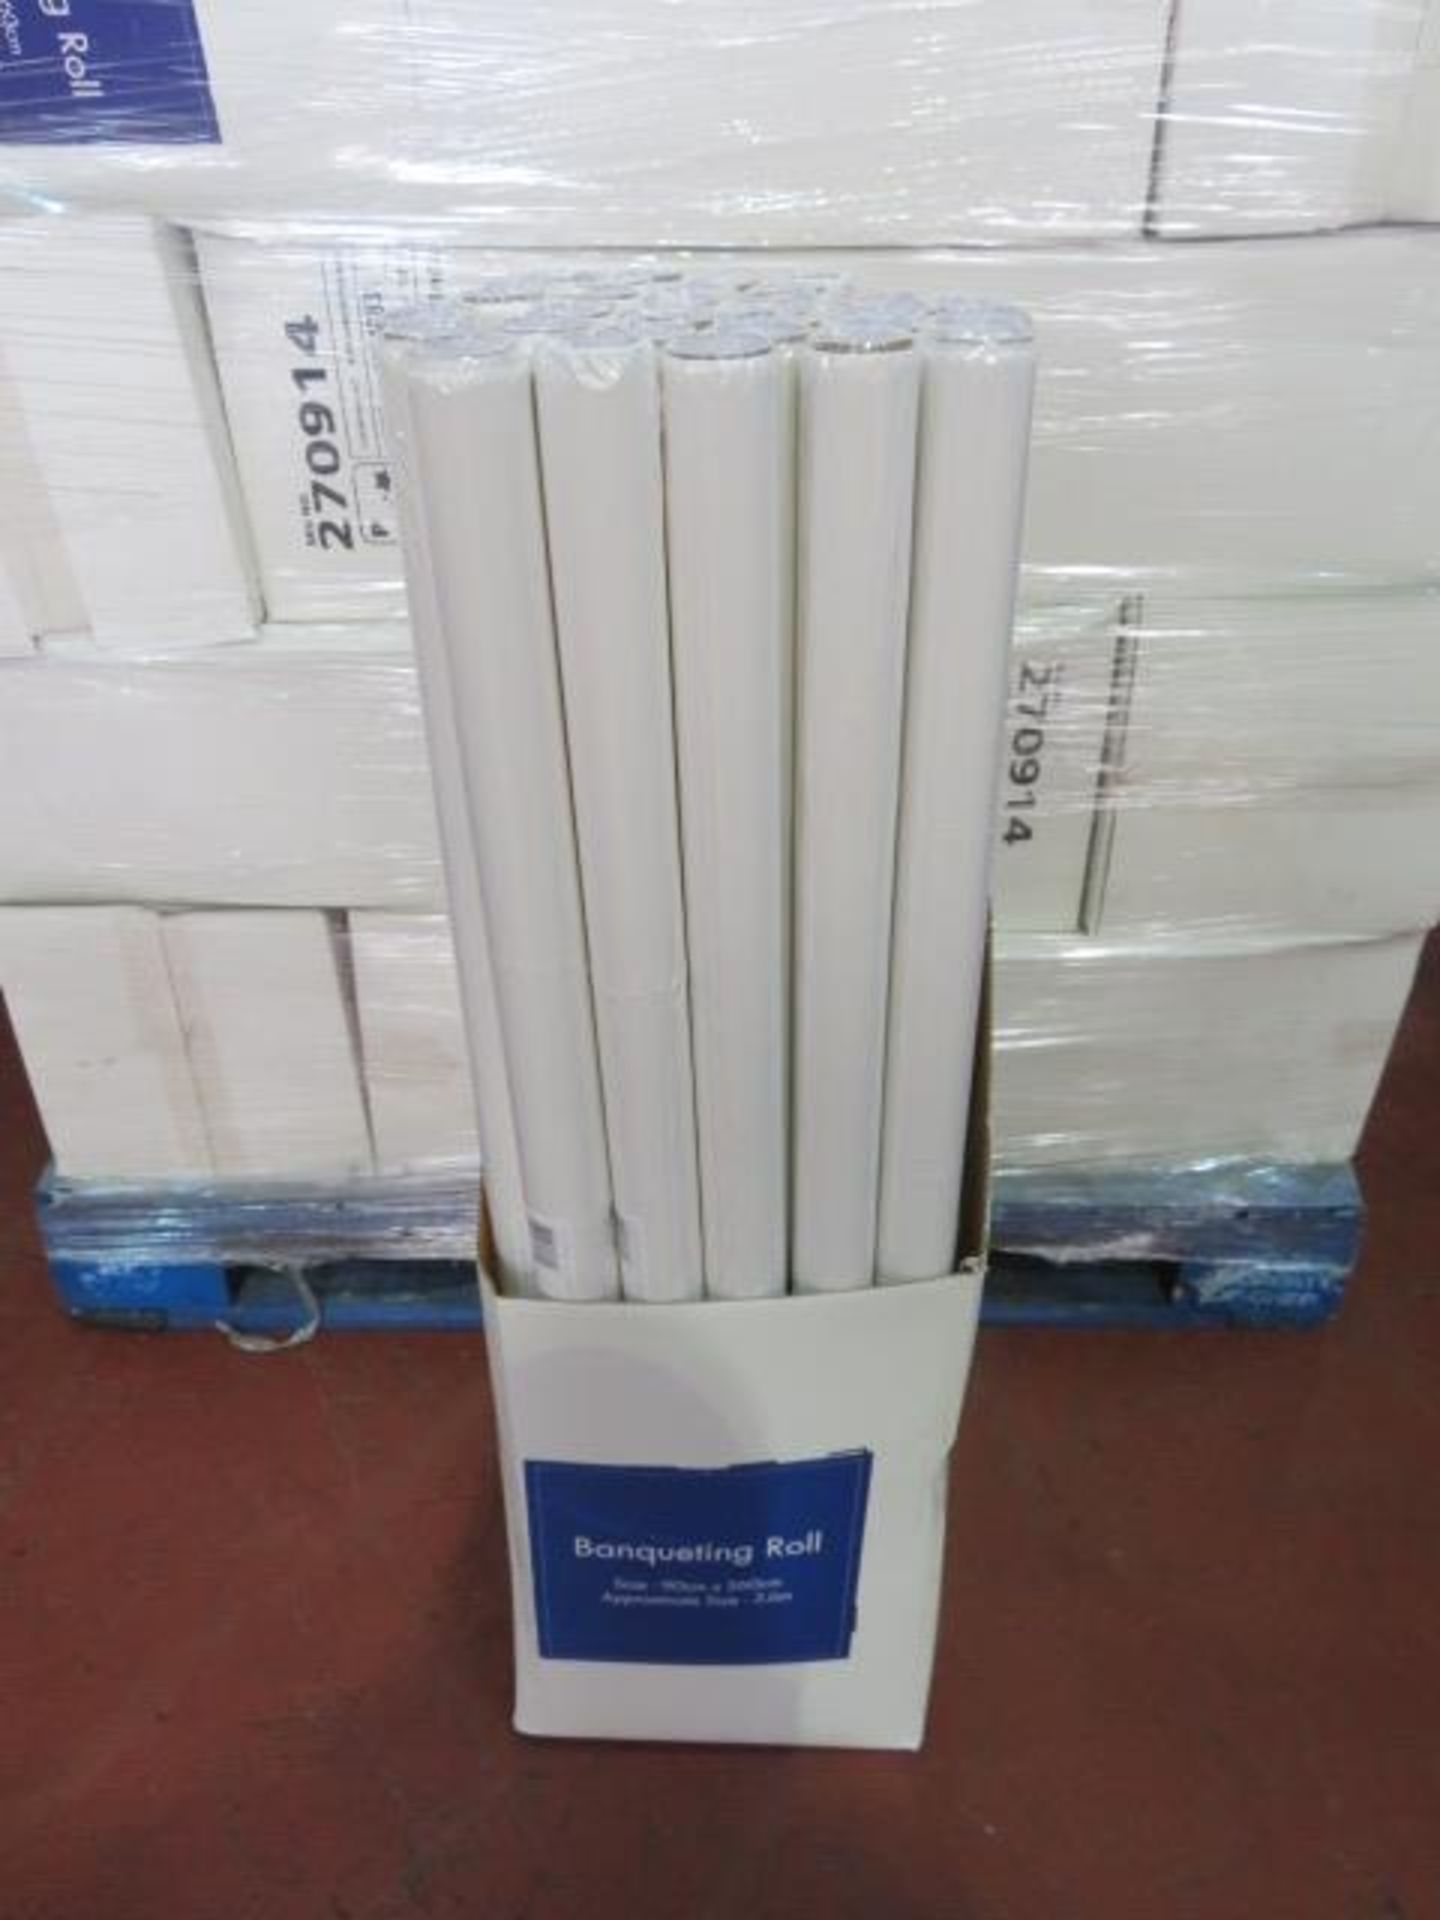 (20) PALLET TO CONTAIN 864 x BRAND NEW 3.6M BANQUETING ROLL. SIZE: 90 x 360CM. RRP £1.99 EACH.... - Image 3 of 3